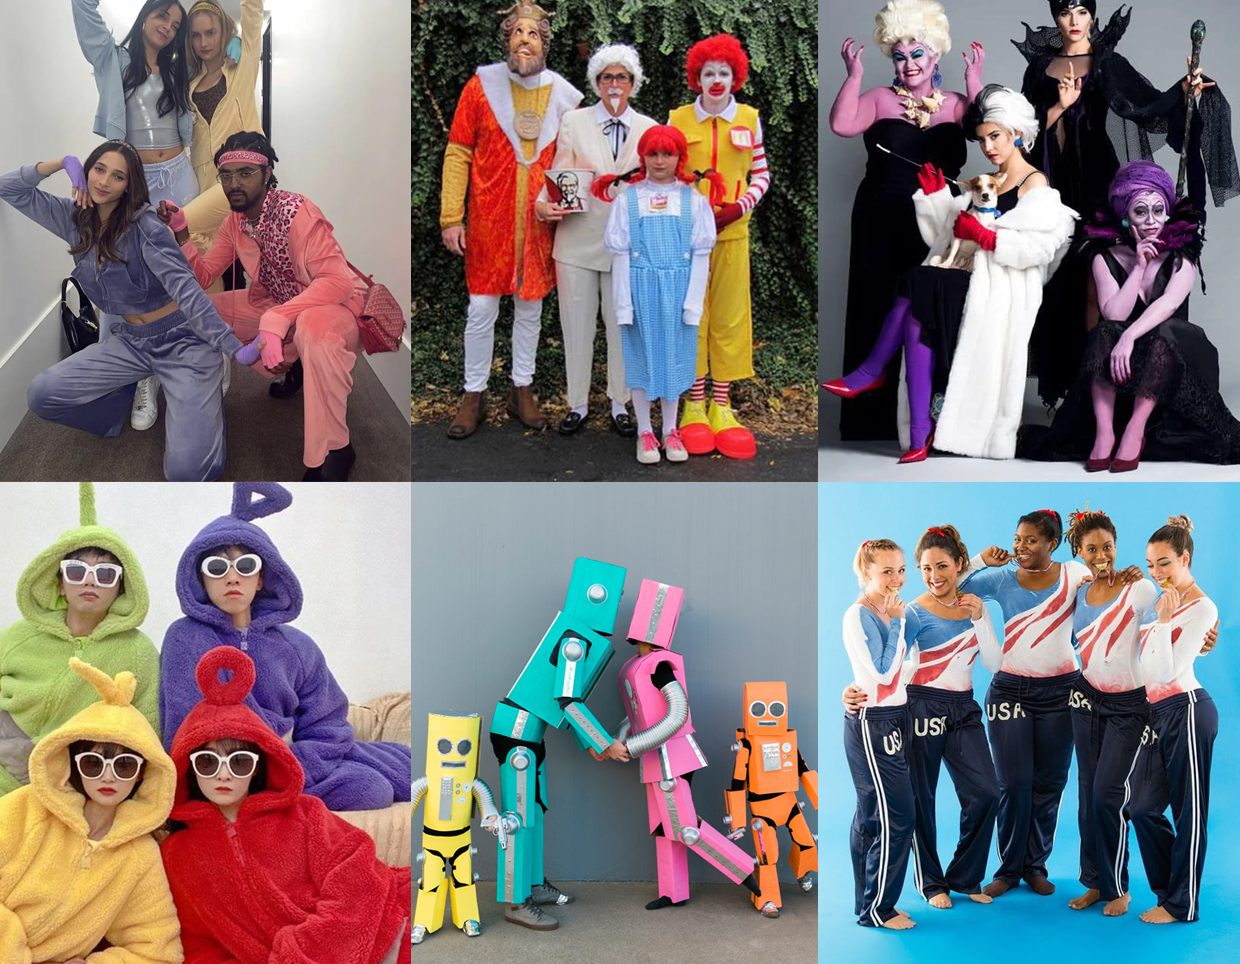 Halloween Costumes From Amazon For The Whole Family! - A Beautiful Mess